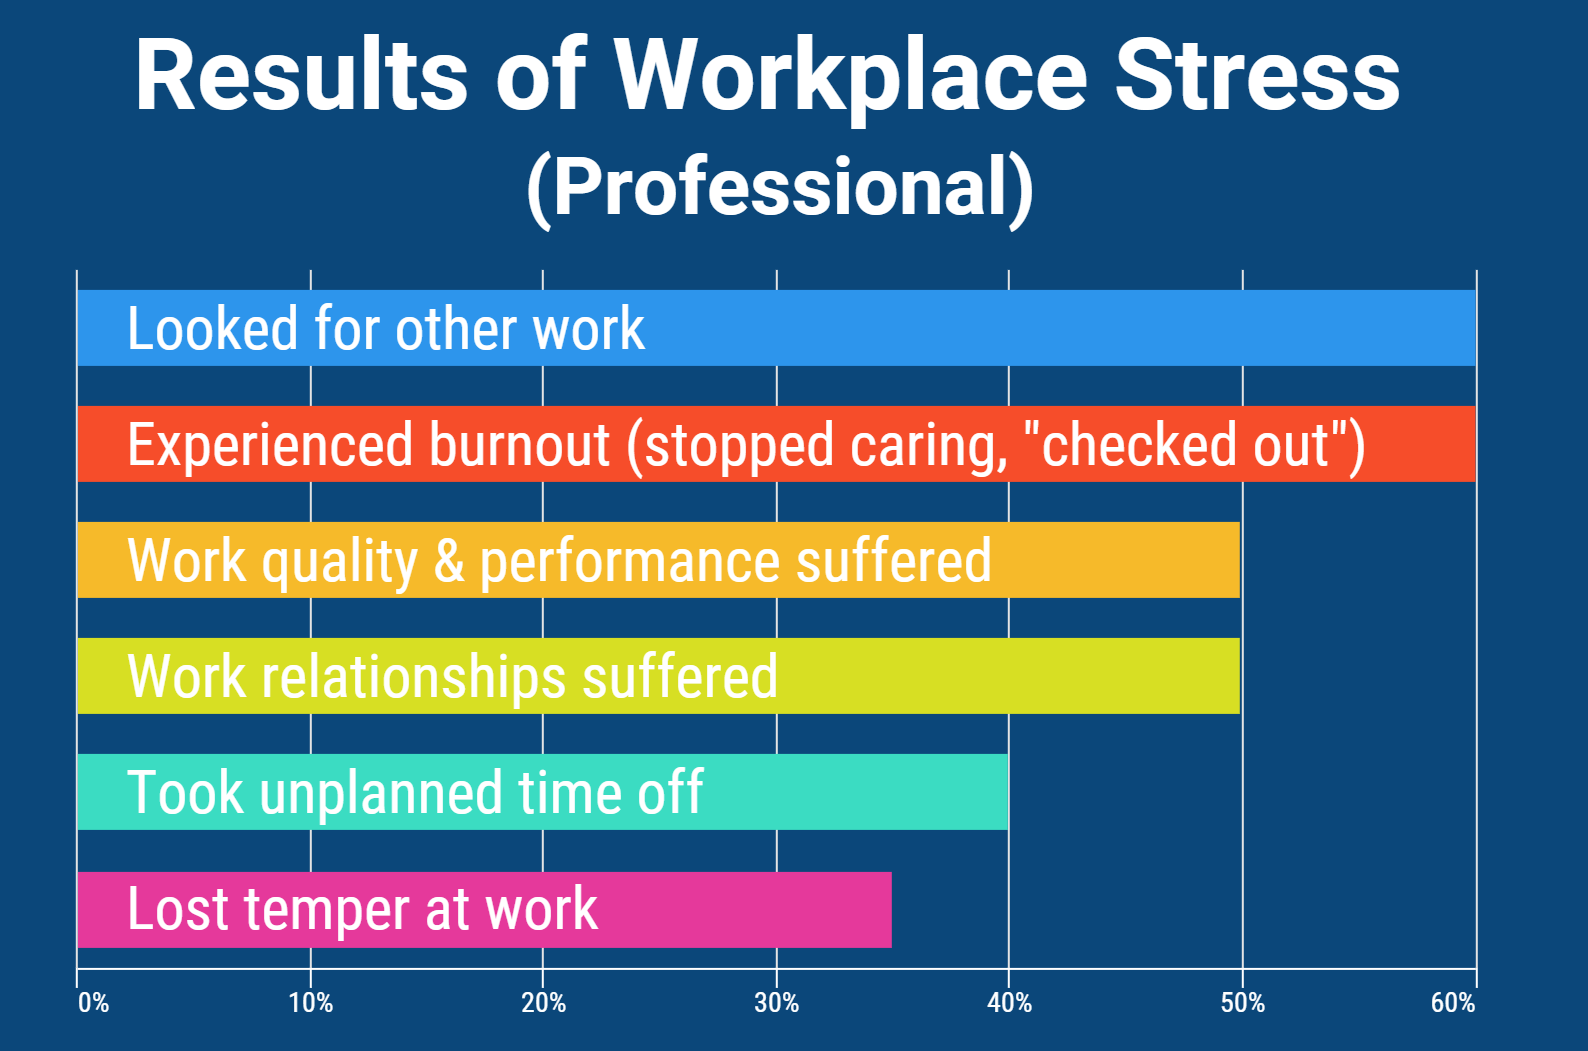 How does stress affect job performance and organizational commitment